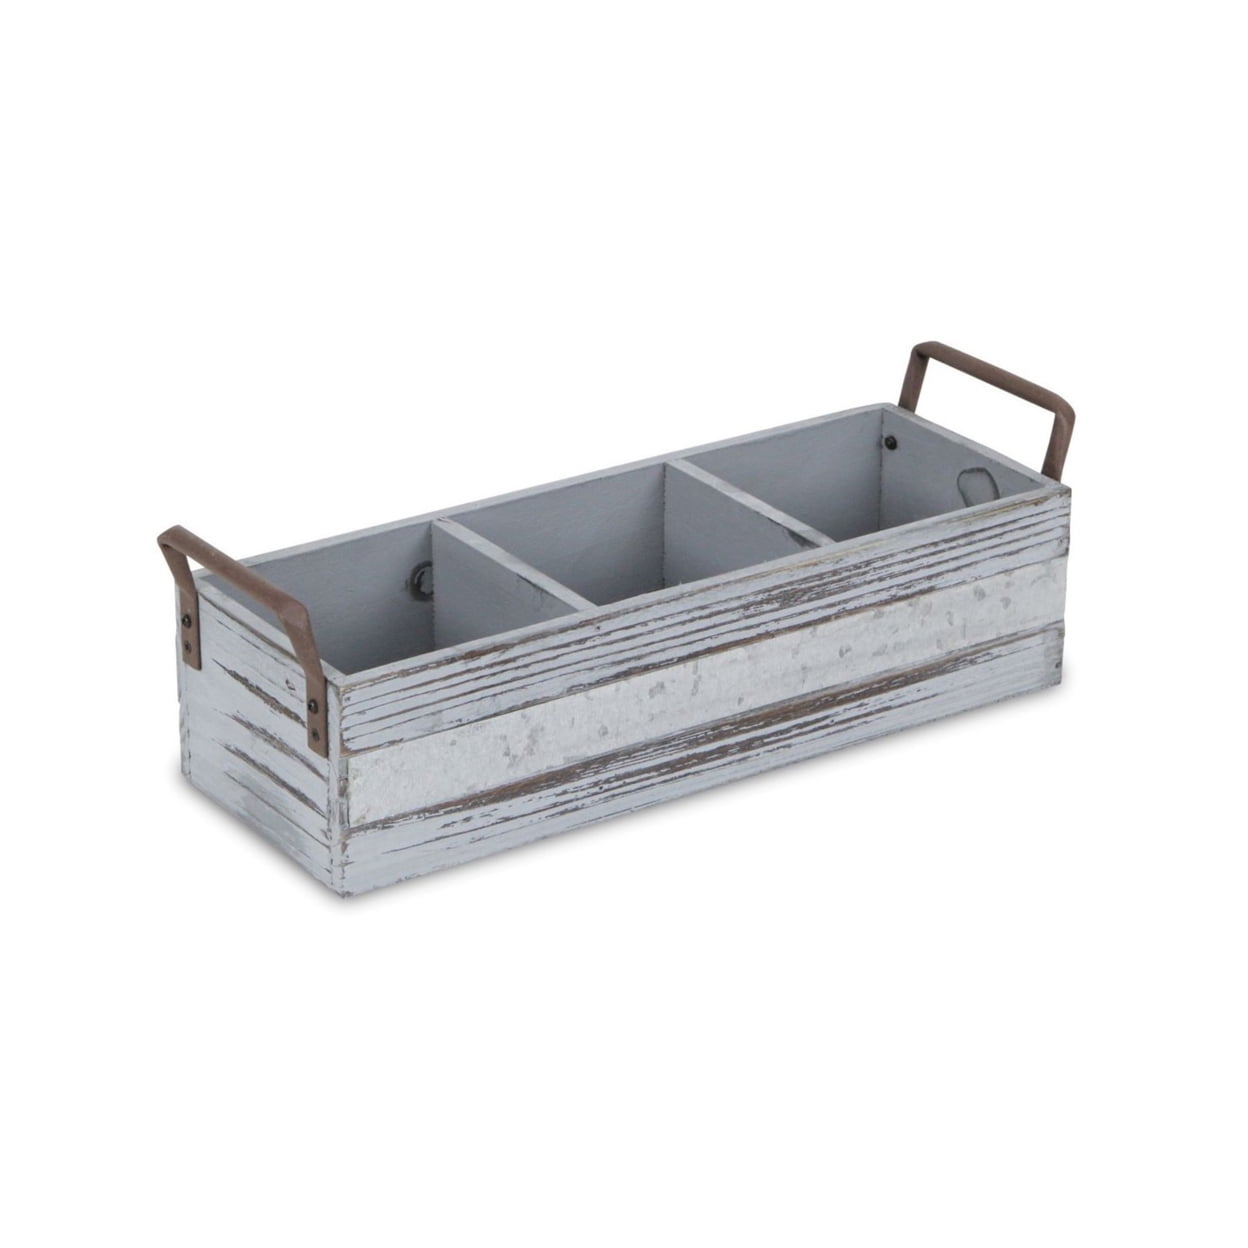 Fp-3878gw Gray Wash Wooden 3 Slot Storage Caddy With Side Metal Handles & Center Galvanized Accent